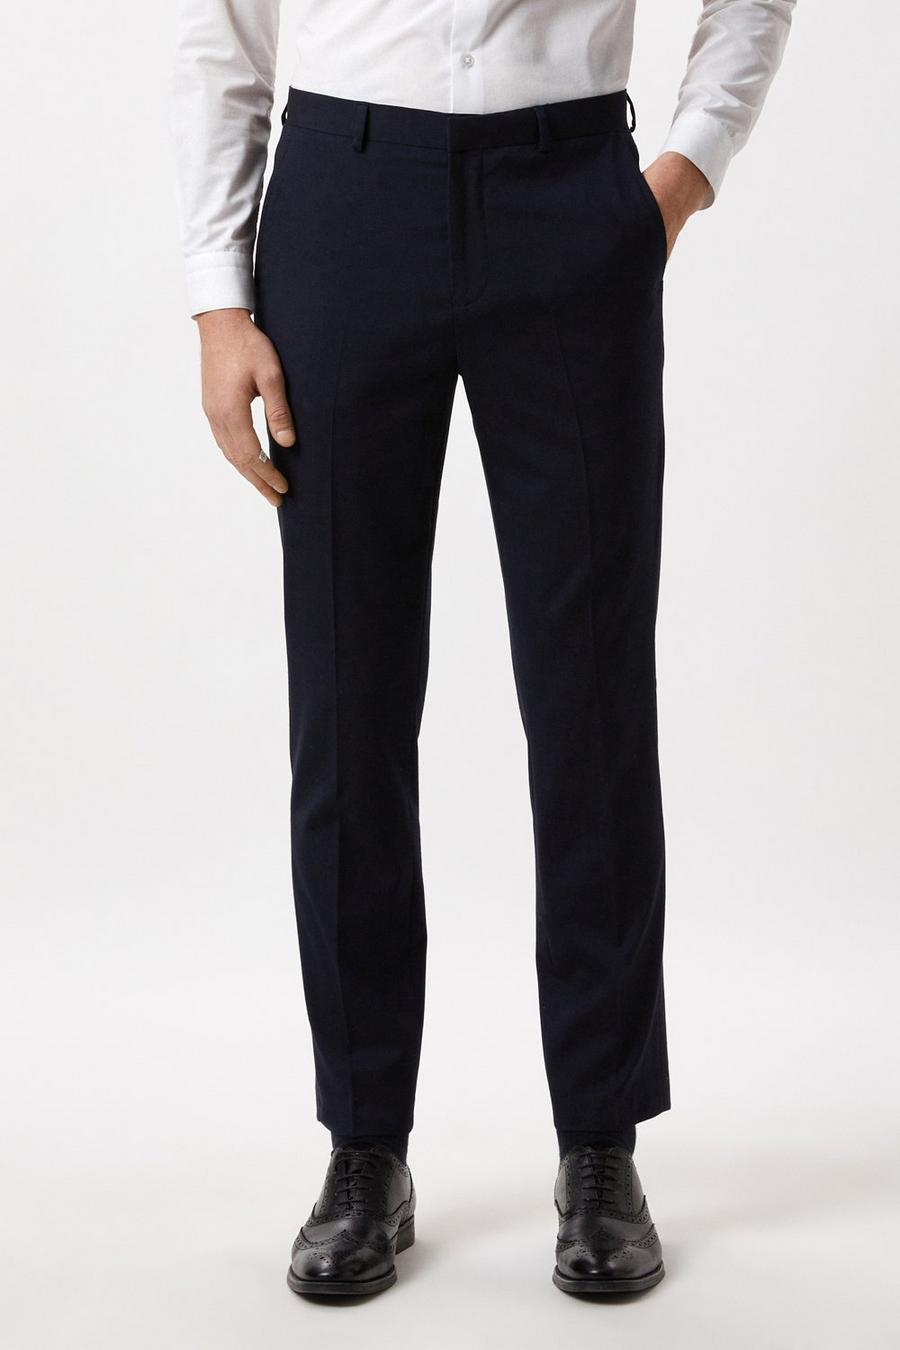 Plus And Tall Navy Tailored Essential Trousers